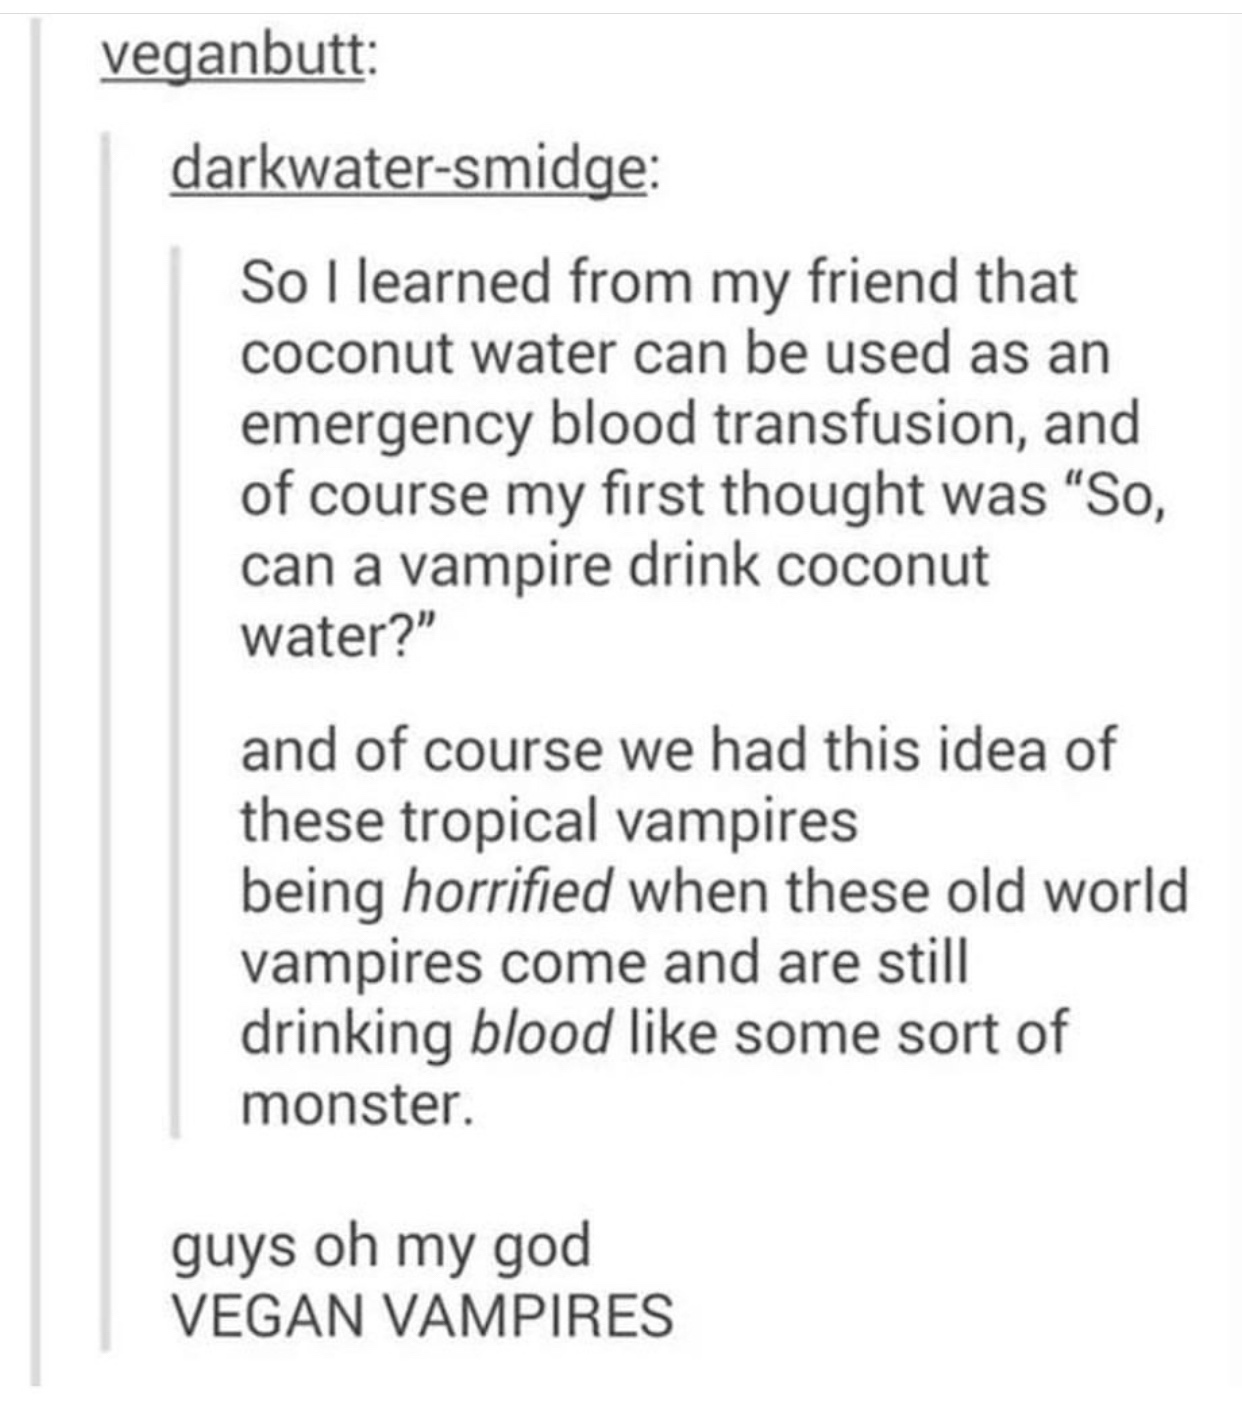 document - veganbutt darkwatersmidge So I learned from my friend that coconut water can be used as an emergency blood transfusion, and of course my first thought was "So, can a vampire drink coconut water?" and of course we had this idea of these tropical